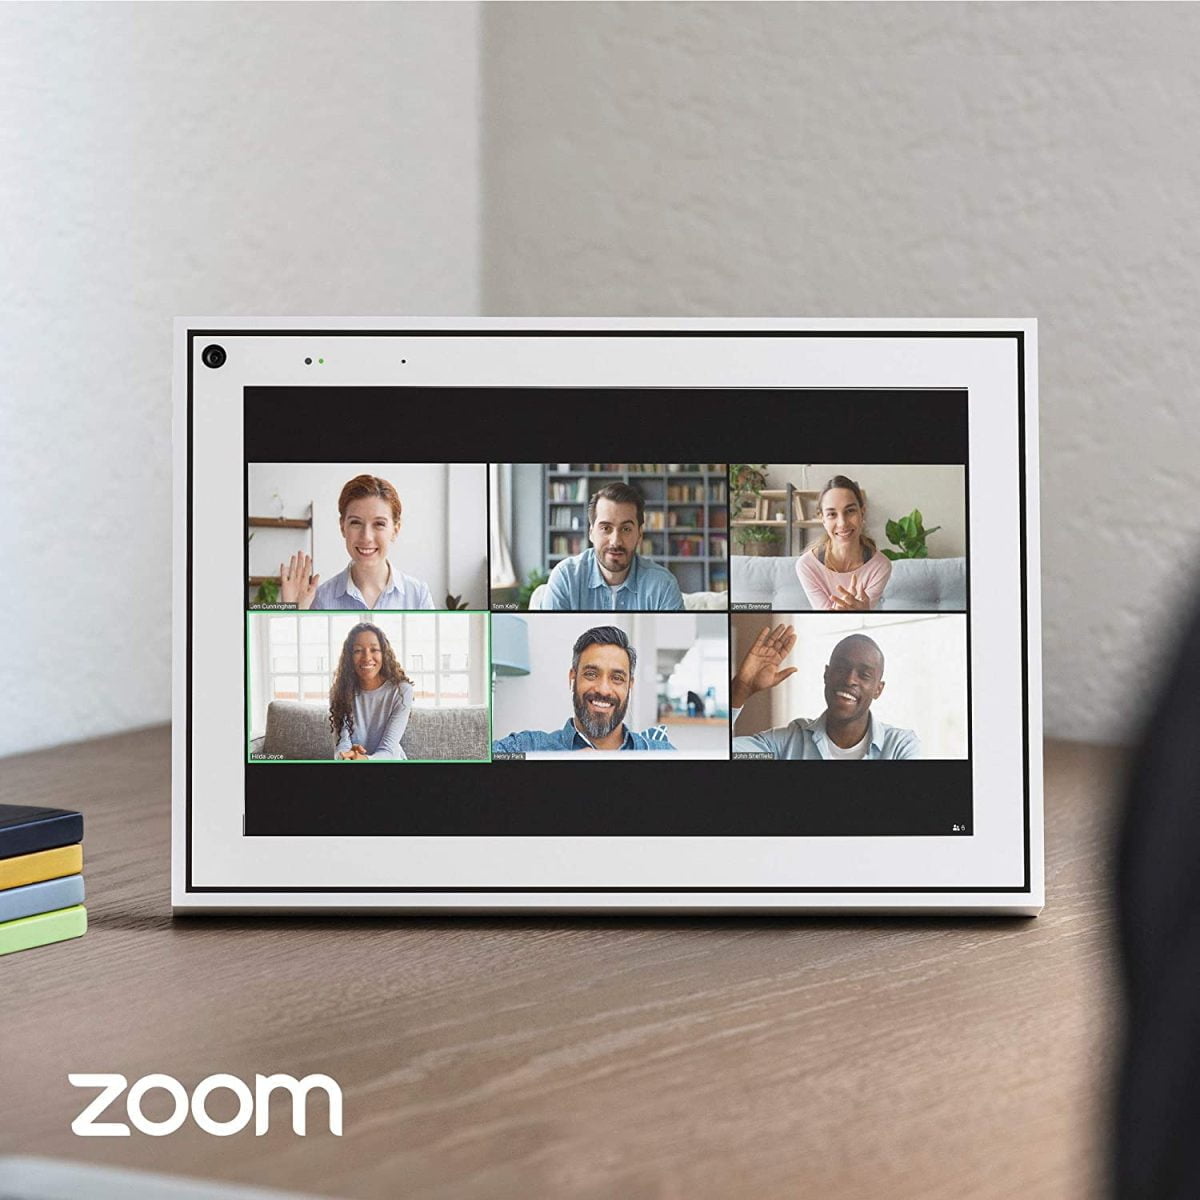 81Pkjwzoebl. Ac Sl1500 Facebook Portal - Smart Video Calling 10” Touch Screen Display With Alexa – White &Lt;Ul Class=&Quot;A-Unordered-List A-Vertical A-Spacing-Mini&Quot;&Gt; &Lt;Li&Gt;&Lt;Span Class=&Quot;A-List-Item&Quot;&Gt;Easily Video Call With Friends And Family Using Your Messenger, Whatsapp Or Zoom Account, Even If They Don'T Have Portal.&Lt;/Span&Gt;&Lt;/Li&Gt; &Lt;Li&Gt;&Lt;Span Class=&Quot;A-List-Item&Quot;&Gt;Smart Camera Automatically Pans And Zooms To Keep Everyone In Frame, So You Can Catch Up Hands-Free.&Lt;/Span&Gt;&Lt;/Li&Gt; &Lt;Li&Gt;&Lt;Span Class=&Quot;A-List-Item&Quot;&Gt;Hear And Be Heard. Smart Sound Enhances Your Voice While Minimizing Unwanted Background Noise.&Lt;/Span&Gt;&Lt;/Li&Gt; &Lt;Li&Gt;&Lt;Span Class=&Quot;A-List-Item&Quot;&Gt;Experience Even More Together. Join Or Host A Group Call Of Up To 50 People With Messenger Rooms.&Lt;/Span&Gt;&Lt;/Li&Gt; &Lt;Li&Gt;&Lt;Span Class=&Quot;A-List-Item&Quot;&Gt;Become Some Of Your Children'S Favorite Storybook Characters As You Read Along To Well-Loved Tales With Music, Animation And Immersive Ar Effects.&Lt;/Span&Gt;&Lt;/Li&Gt; &Lt;Li&Gt;&Lt;Span Class=&Quot;A-List-Item&Quot;&Gt;Listen To Your Favorite Music And Streaming Apps Like Spotify Or Pandora, Display Your Photos From Instagram And Facebook, Broadcast With Facebook Live, And More.&Lt;/Span&Gt;&Lt;/Li&Gt; &Lt;Li&Gt;&Lt;Span Class=&Quot;A-List-Item&Quot;&Gt;Work Smarter From Home With Partners Like Zoom And Workplace From Facebook. Connect With Co-Workers Even If They’re Remote.&Lt;/Span&Gt;&Lt;/Li&Gt; &Lt;/Ul&Gt; &Lt;Div Class=&Quot;A-Row A-Expander-Container A-Expander-Inline-Container&Quot; Aria-Live=&Quot;Polite&Quot;&Gt; &Lt;Div Class=&Quot;A-Expander-Content A-Expander-Extend-Content A-Expander-Content-Expanded&Quot; Aria-Expanded=&Quot;True&Quot;&Gt; &Lt;Ul Class=&Quot;A-Unordered-List A-Vertical A-Spacing-None&Quot;&Gt; &Lt;Li&Gt;&Lt;Span Class=&Quot;A-List-Item&Quot;&Gt;See And Do More With Alexa Built-In. Control Your Smart Home, Listen To Your Favorite Music, Watch The News, Get The Weather, Set A Timer And More.&Lt;/Span&Gt;&Lt;/Li&Gt; &Lt;Li&Gt;&Lt;Span Class=&Quot;A-List-Item&Quot;&Gt;Easily Disable The Camera And Microphone, Or Block The Camera Lens With A Single Switch. All Portal Video Calls Are Encrypted.&Lt;/Span&Gt;&Lt;/Li&Gt; &Lt;/Ul&Gt; &Lt;/Div&Gt; &Lt;/Div&Gt; Facebook Portal - Smart Video Calling 10 Facebook Portal - Smart Video Calling 10” Touch Screen Display With Alexa – White